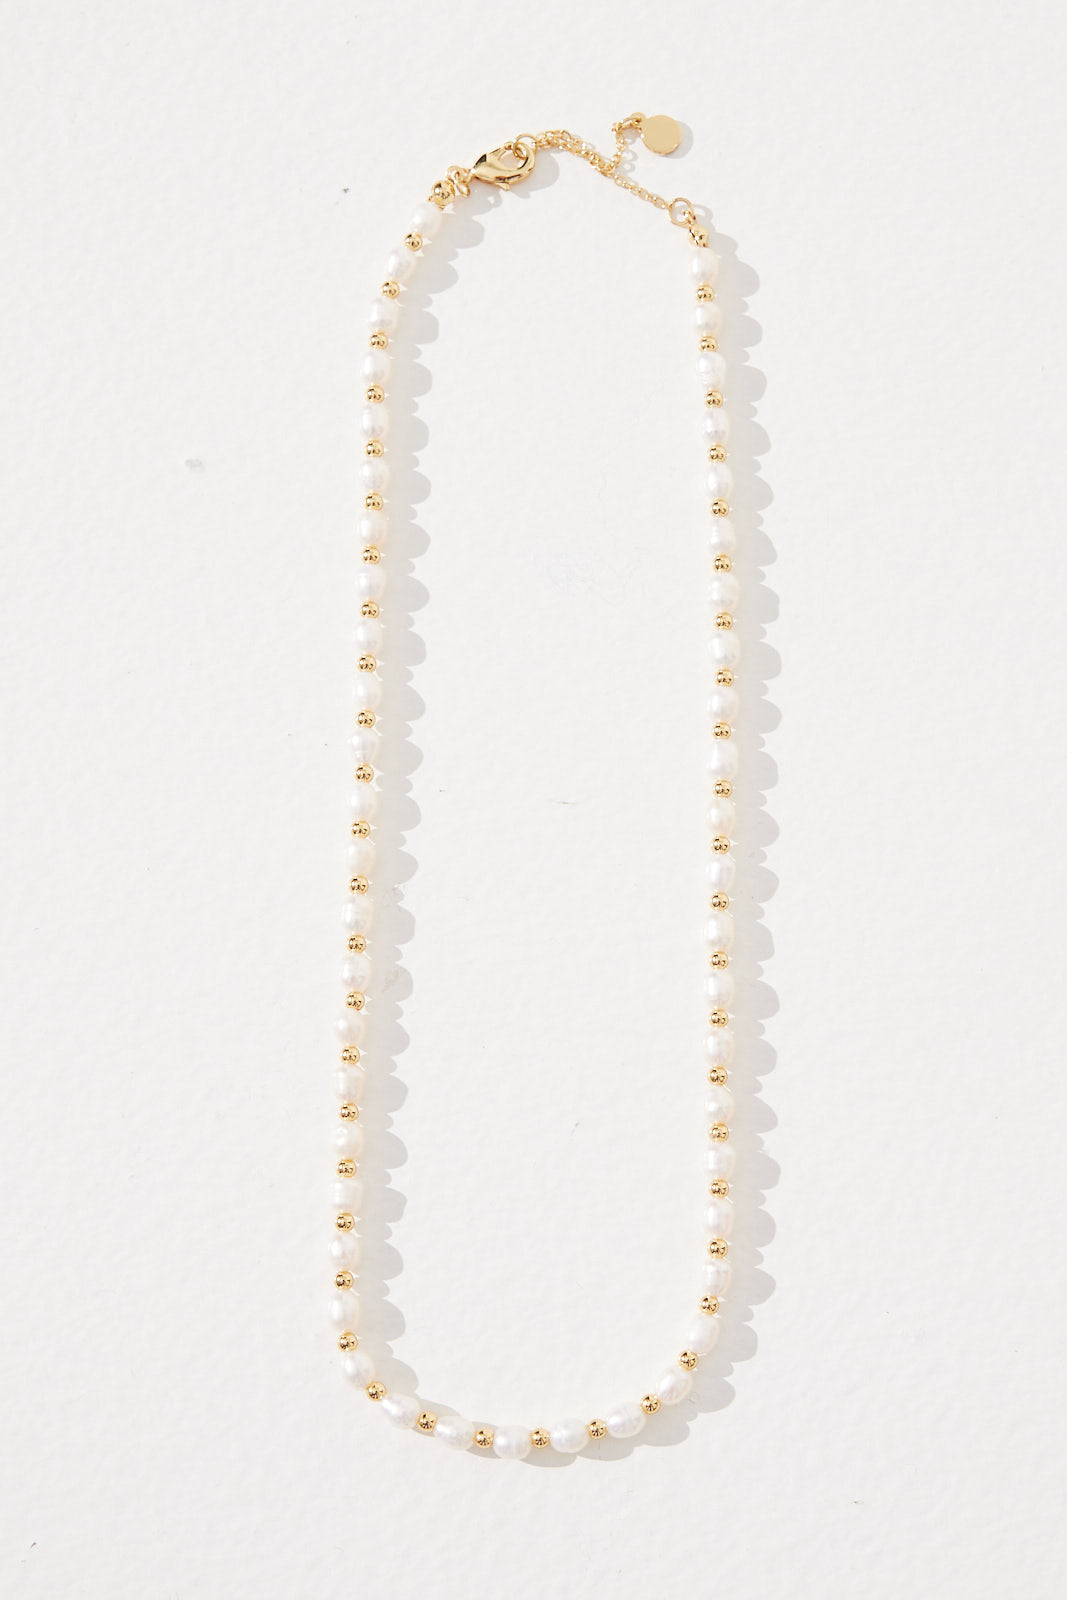 Lindy Pearl Necklace Gold